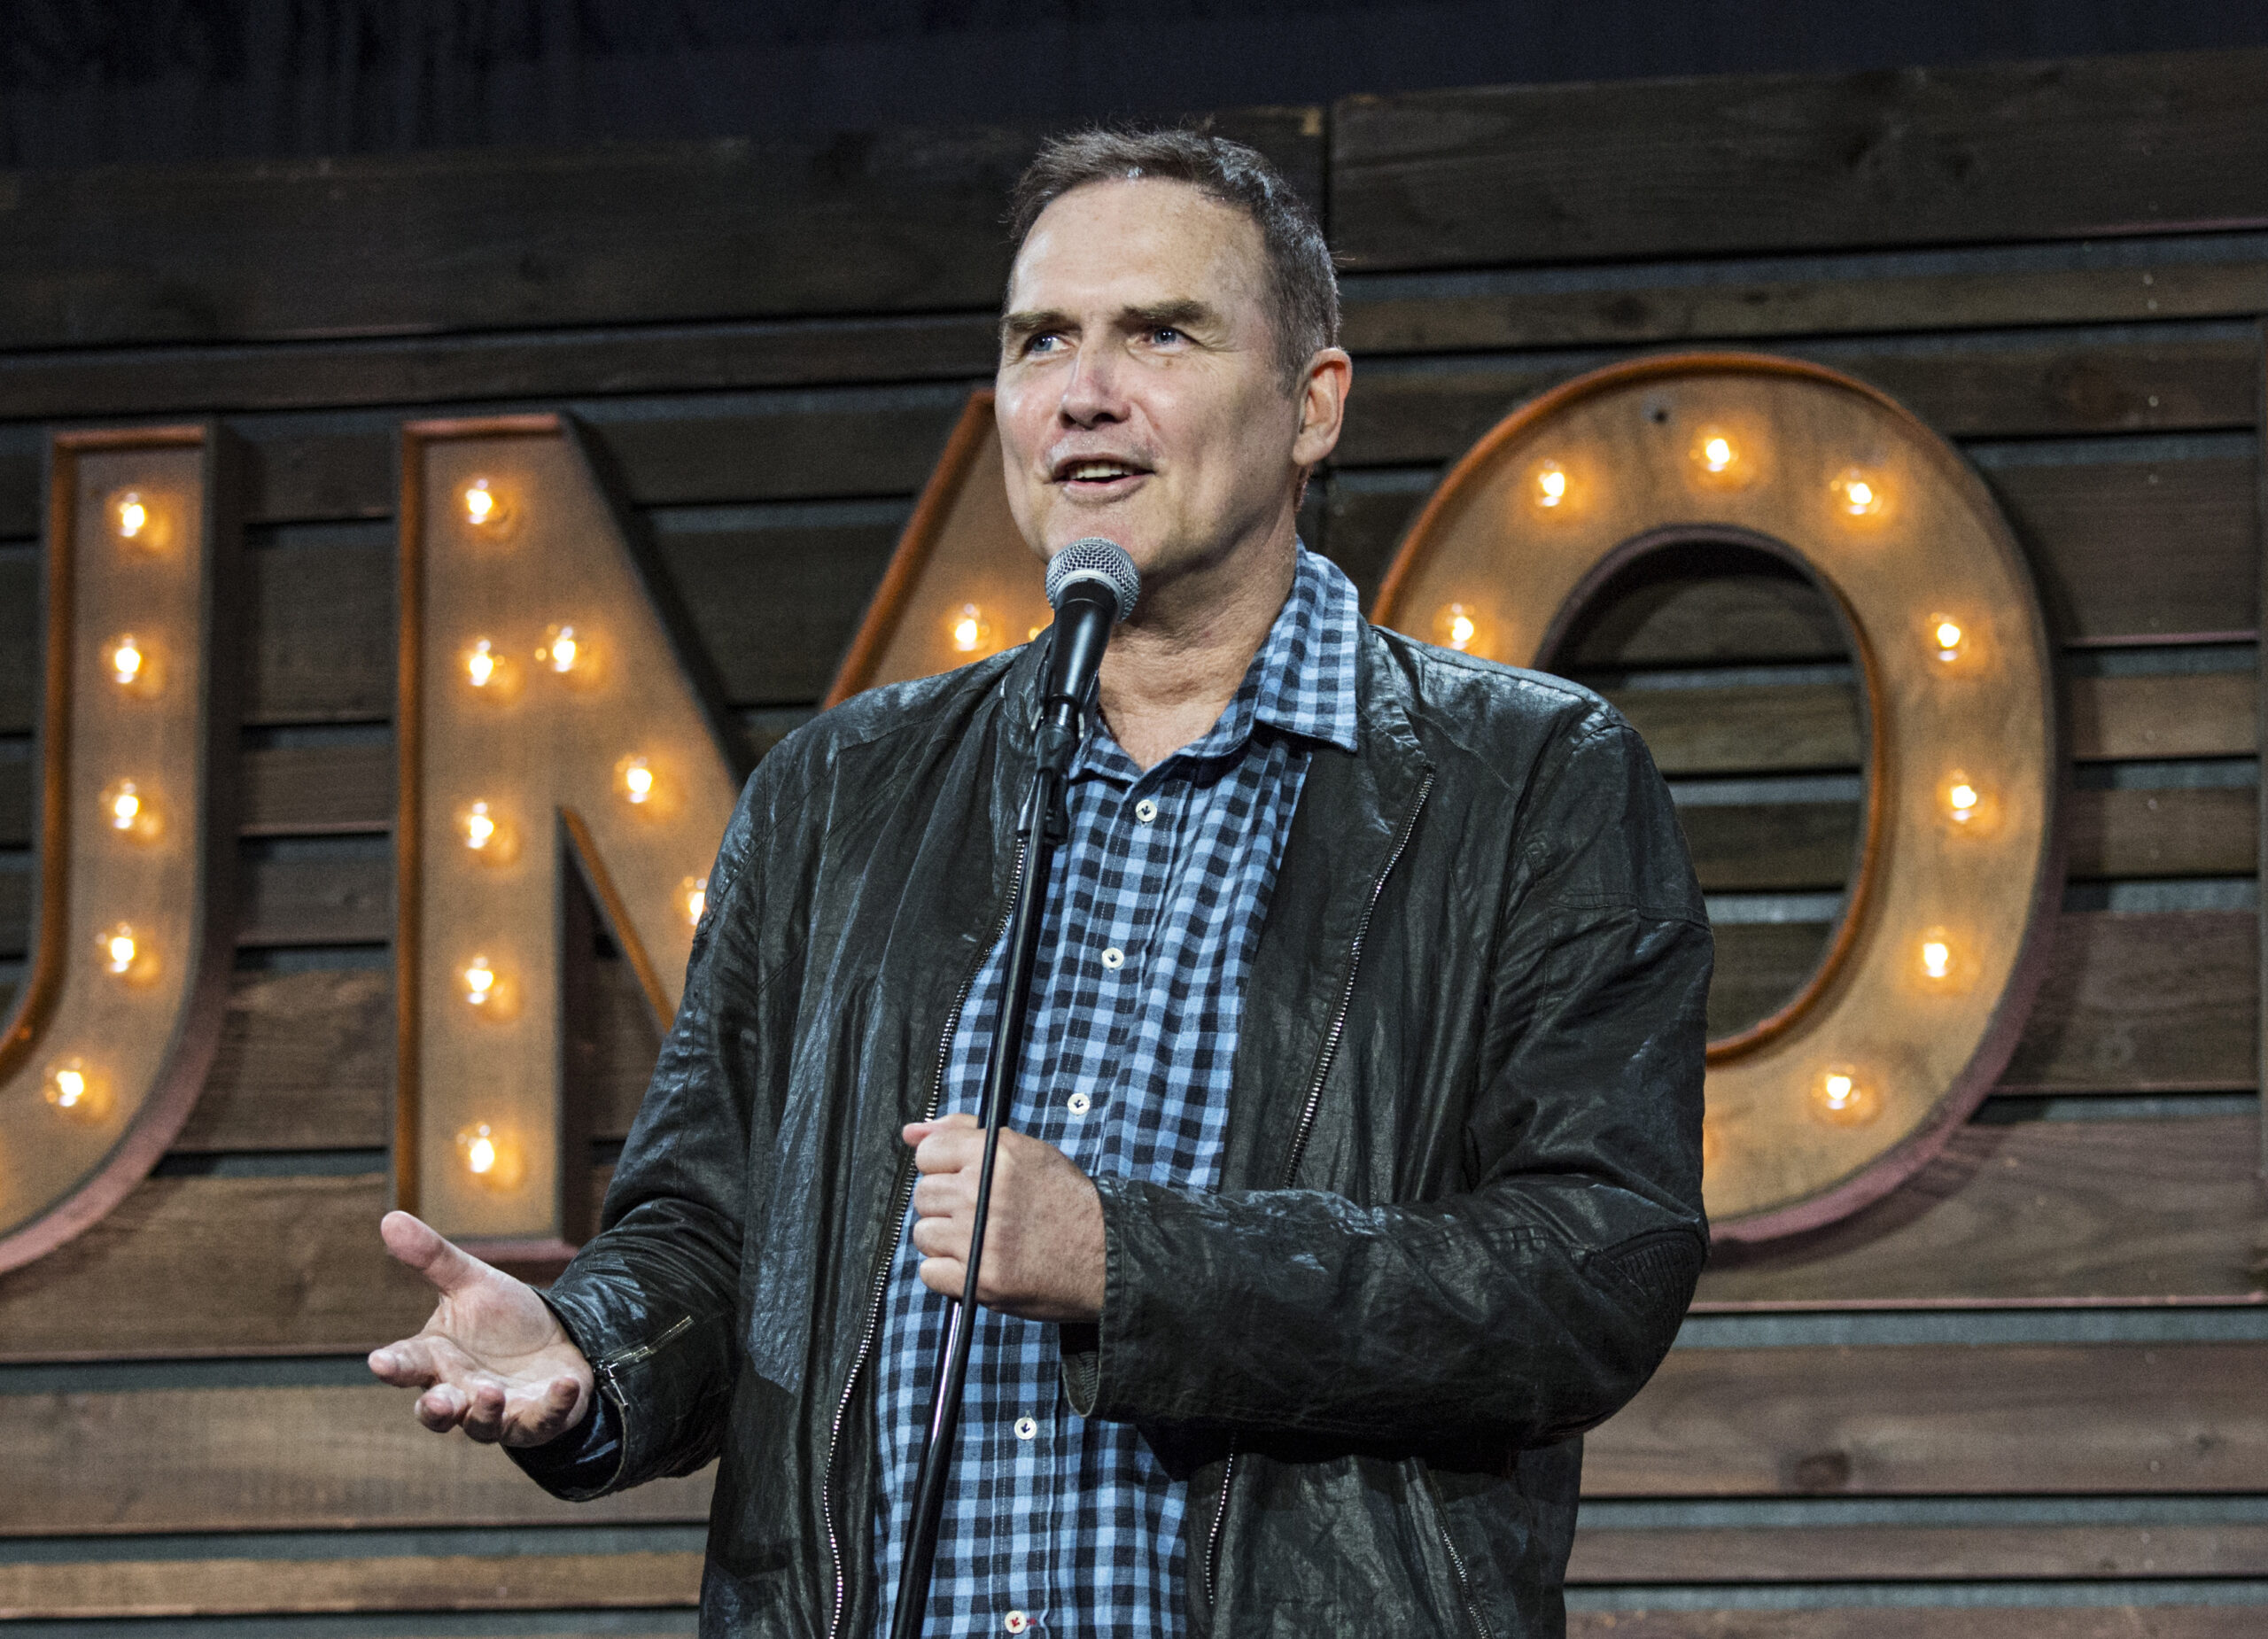 FILE - Norm Macdonald appears at KAABOO 2017 in San Diego on Sept. 16, 2017. MacDonald, a comedian and former cast member on "Saturday Night Live," died Tuesday, Sept. 14, 2021, after a nine-year battle with cancer that he kept private, according to Brillstein Entertainment Partners, his management firm in Los Angeles. He was 61. (Photo by Amy Harris/Invision/AP, File)